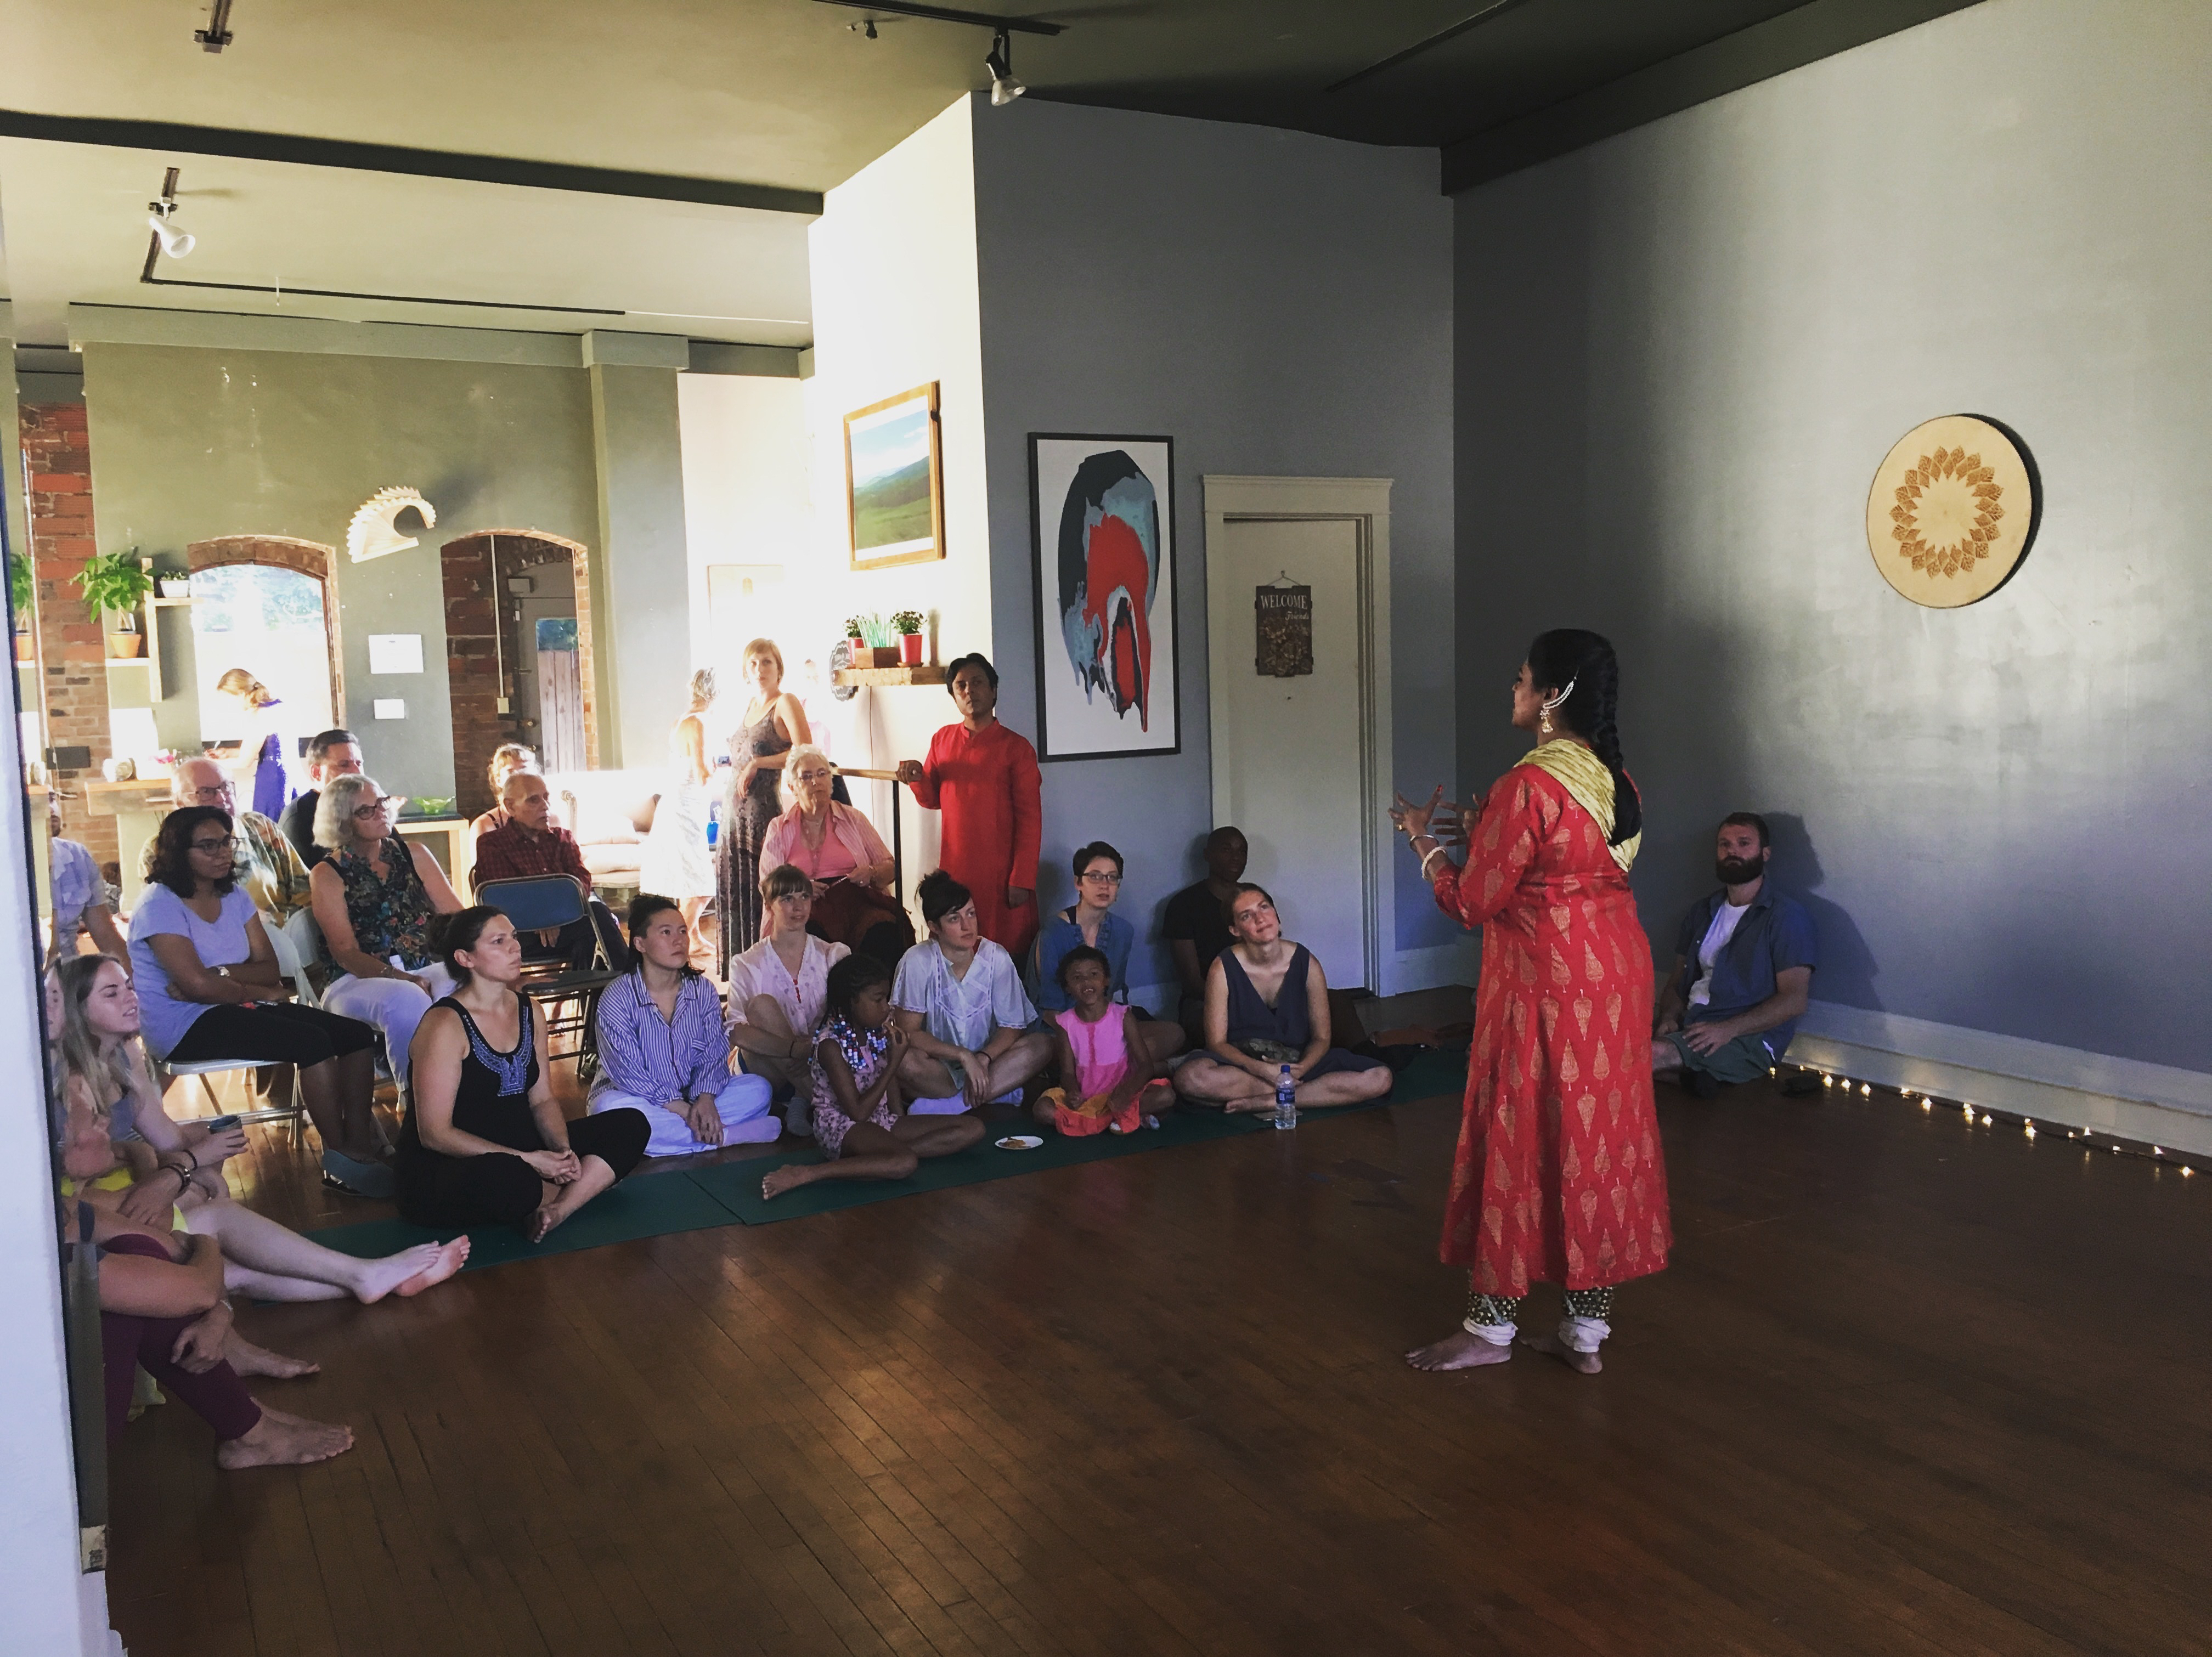 The Somatic Center: Encouraging Mind/Body Health through Dance, Pilates,  Art and Community | CoolCleveland